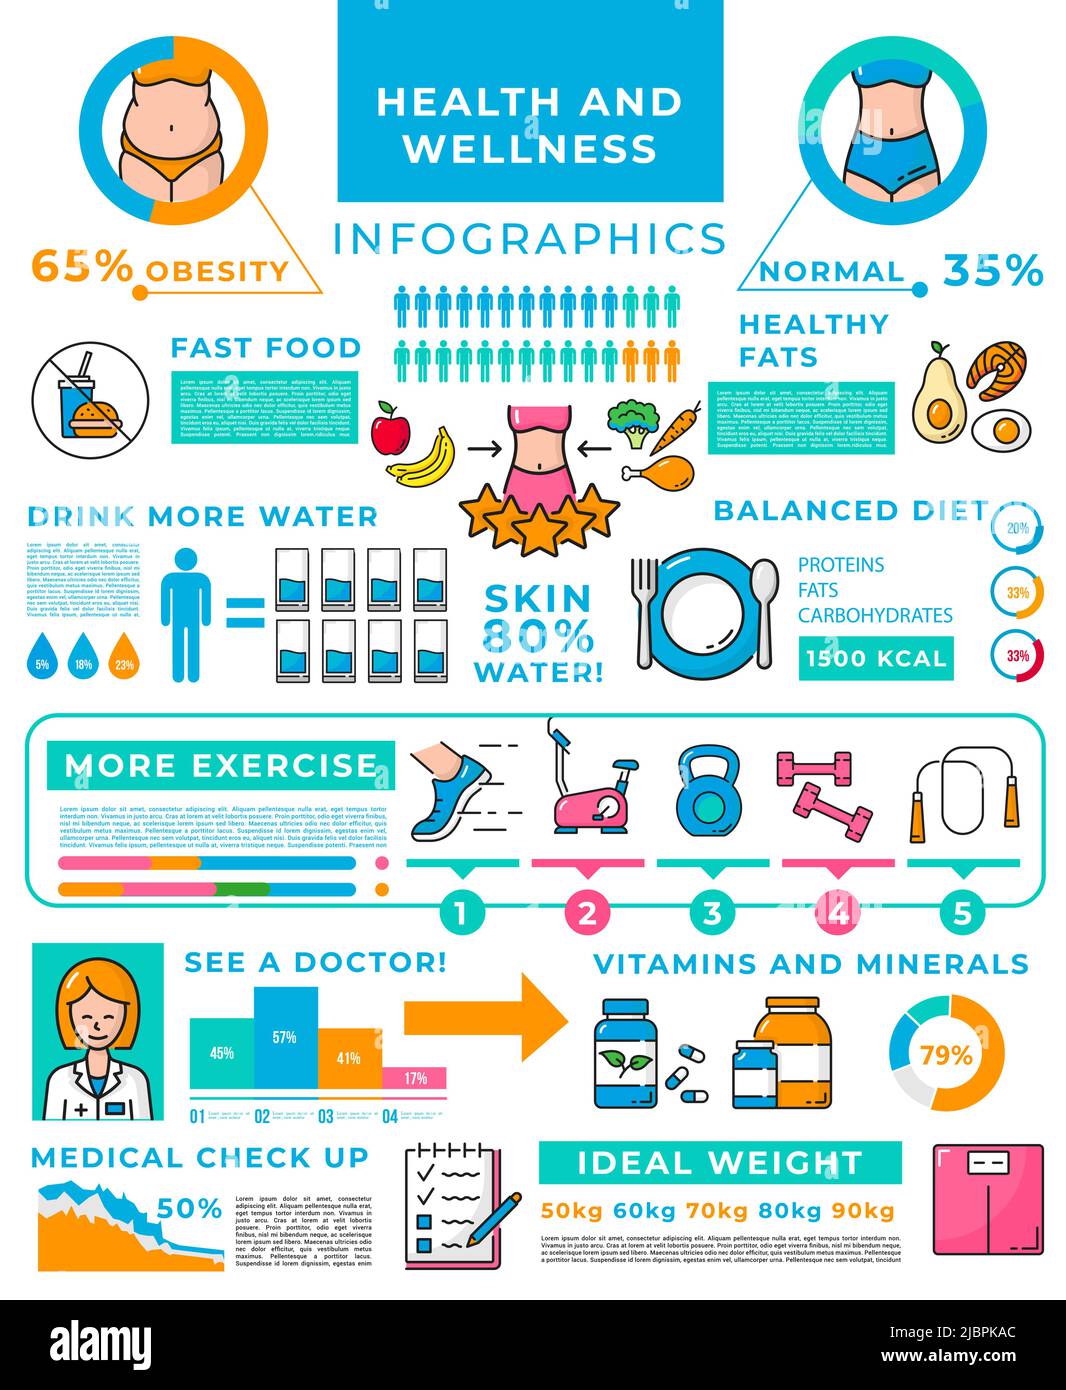 https://c8.alamy.com/comp/2JBPKAC/health-diet-and-wellness-infographics-healthy-food-and-exercises-vector-diagram-chart-healthy-lifestyle-infographics-on-weight-loss-nutrition-and-fitness-obesity-and-sport-information-graphs-2JBPKAC.jpg